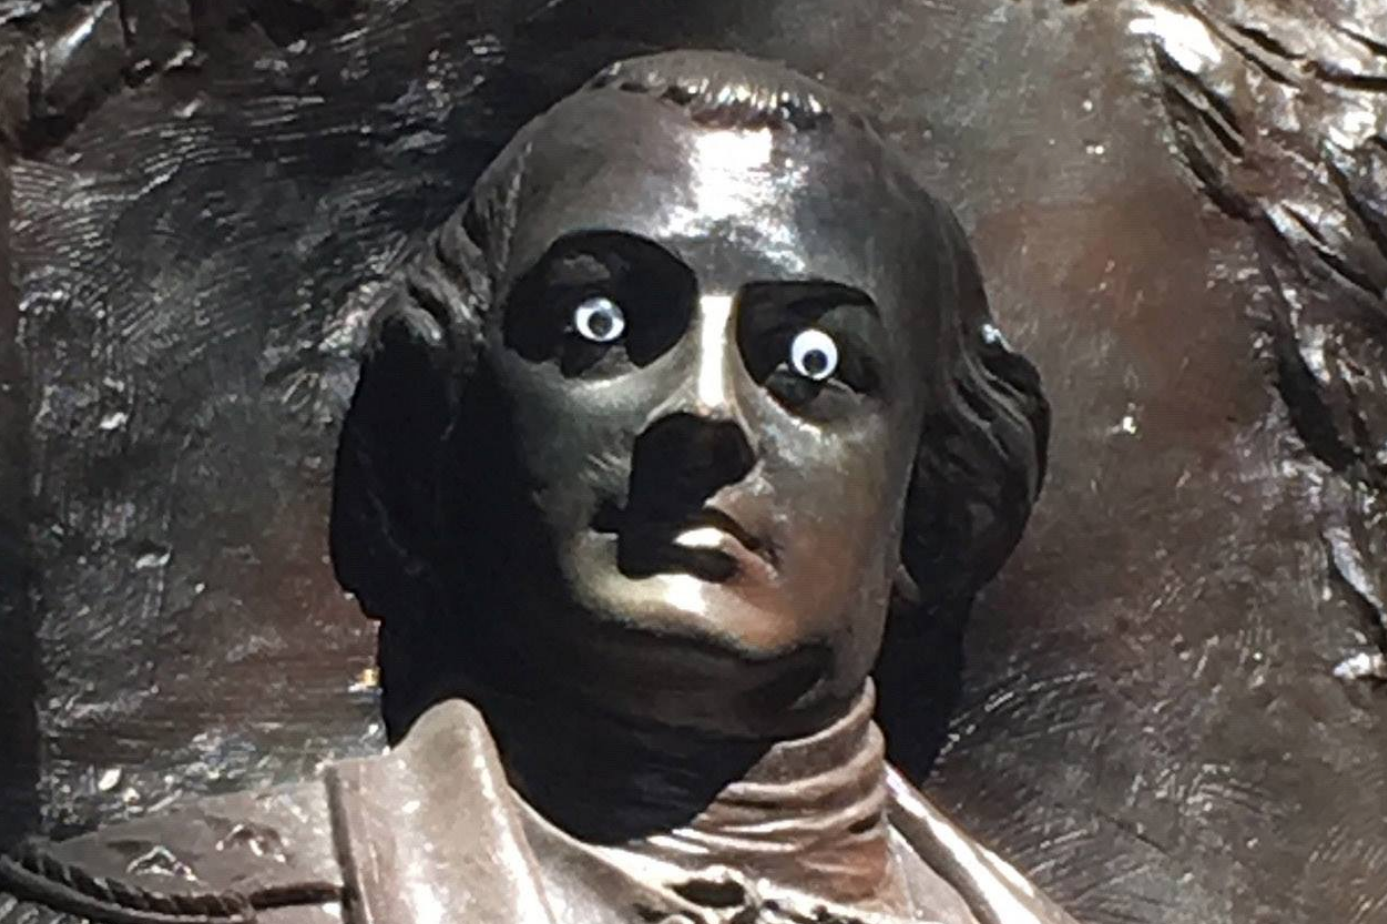 The photo posted on October 11, 2018 by the City of Savannah Government showing “googly eyes” on a statue of Nathanael Greene, a Revolutionary War general.